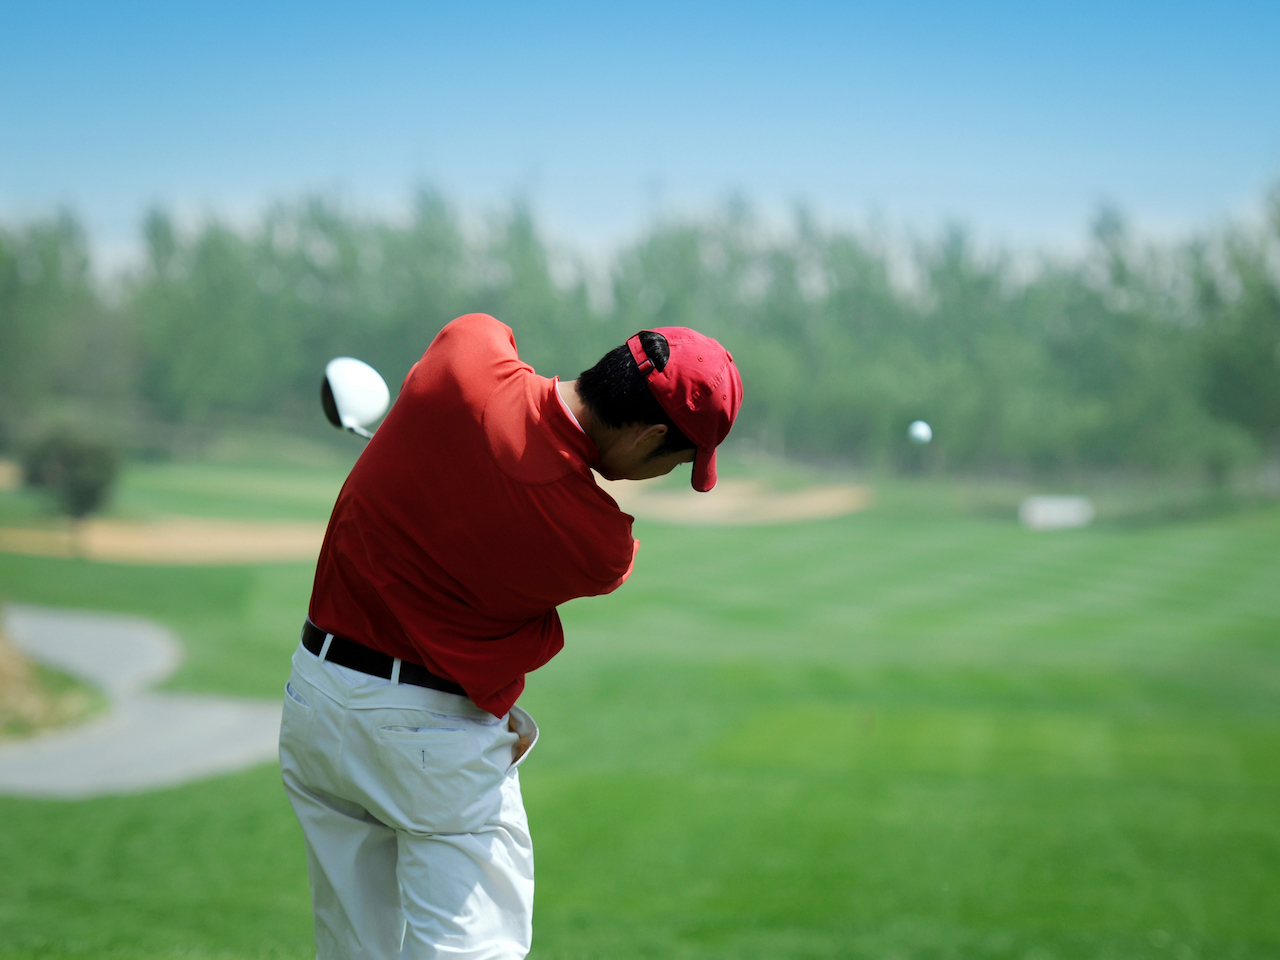 Golfer tees off red clothes